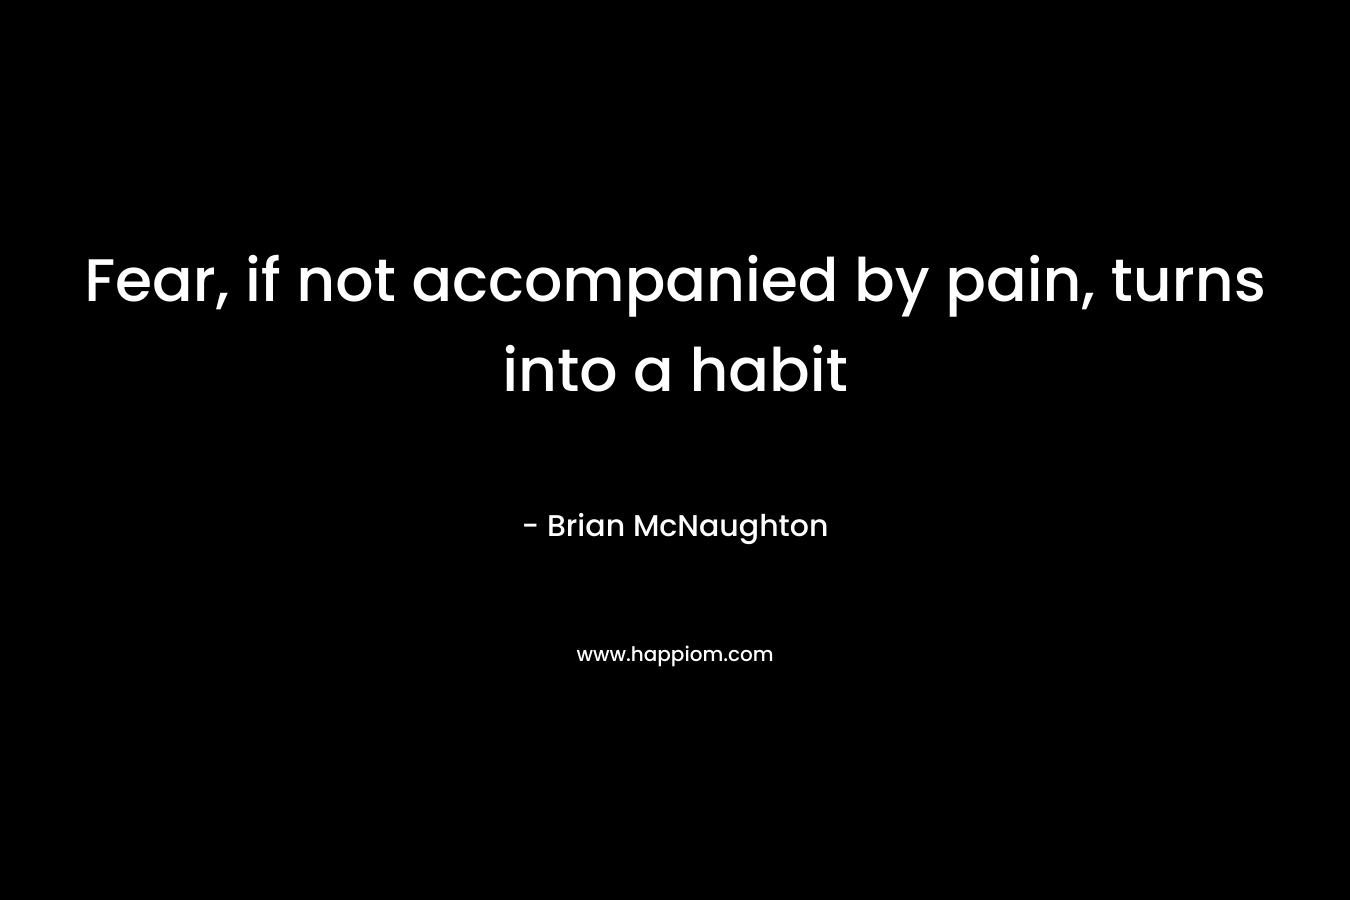 Fear, if not accompanied by pain, turns into a habit